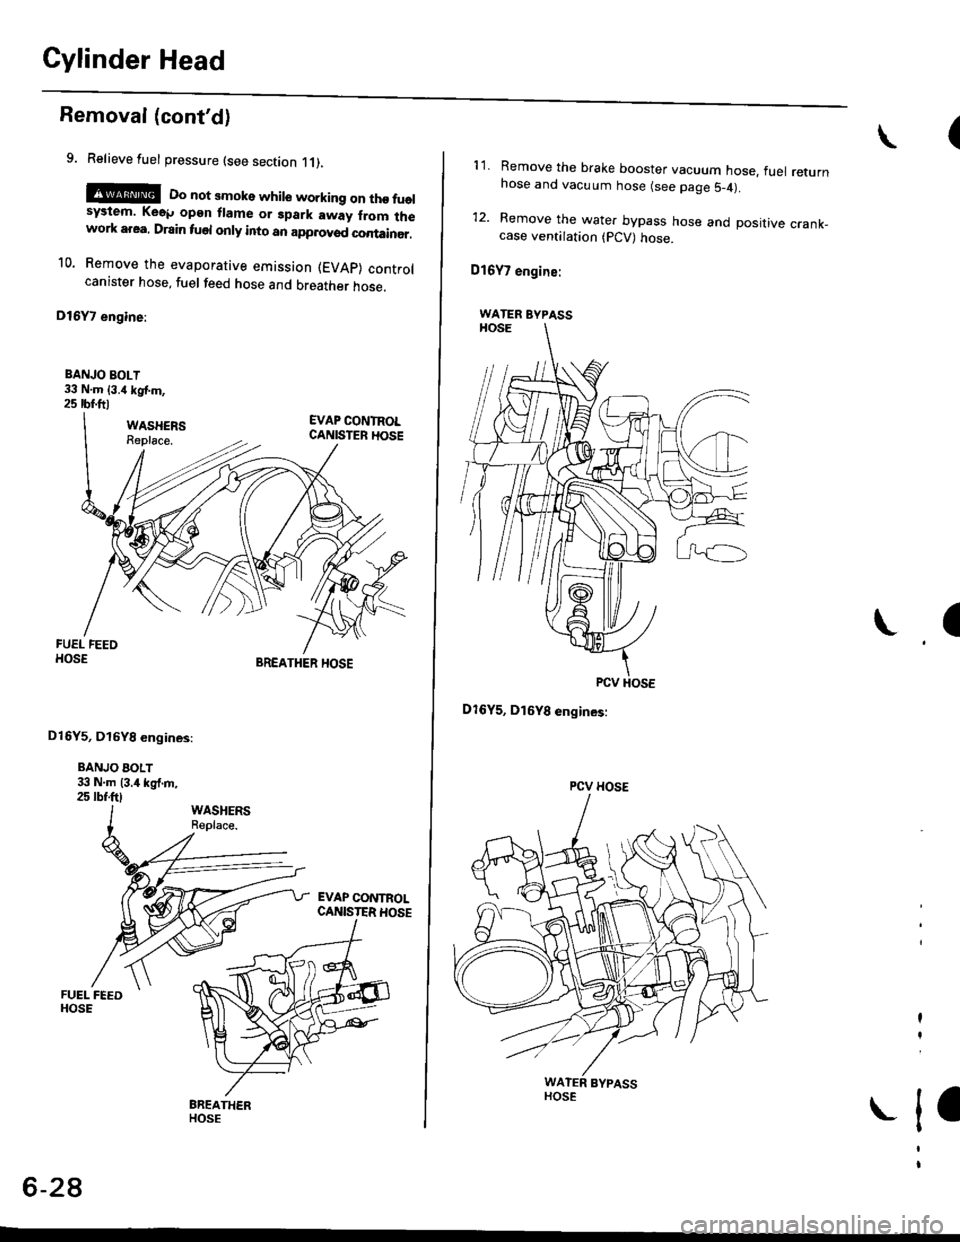 HONDA CIVIC 2000 6.G Workshop Manual Cylinder Head
Removal (contd)
9. Relieve fuel pressure (see section 11),
E@E Do not smoke while working on tho fuelsystem. Ke6p opgn flame or gpark away from lhework area, Drain fuel only into an app